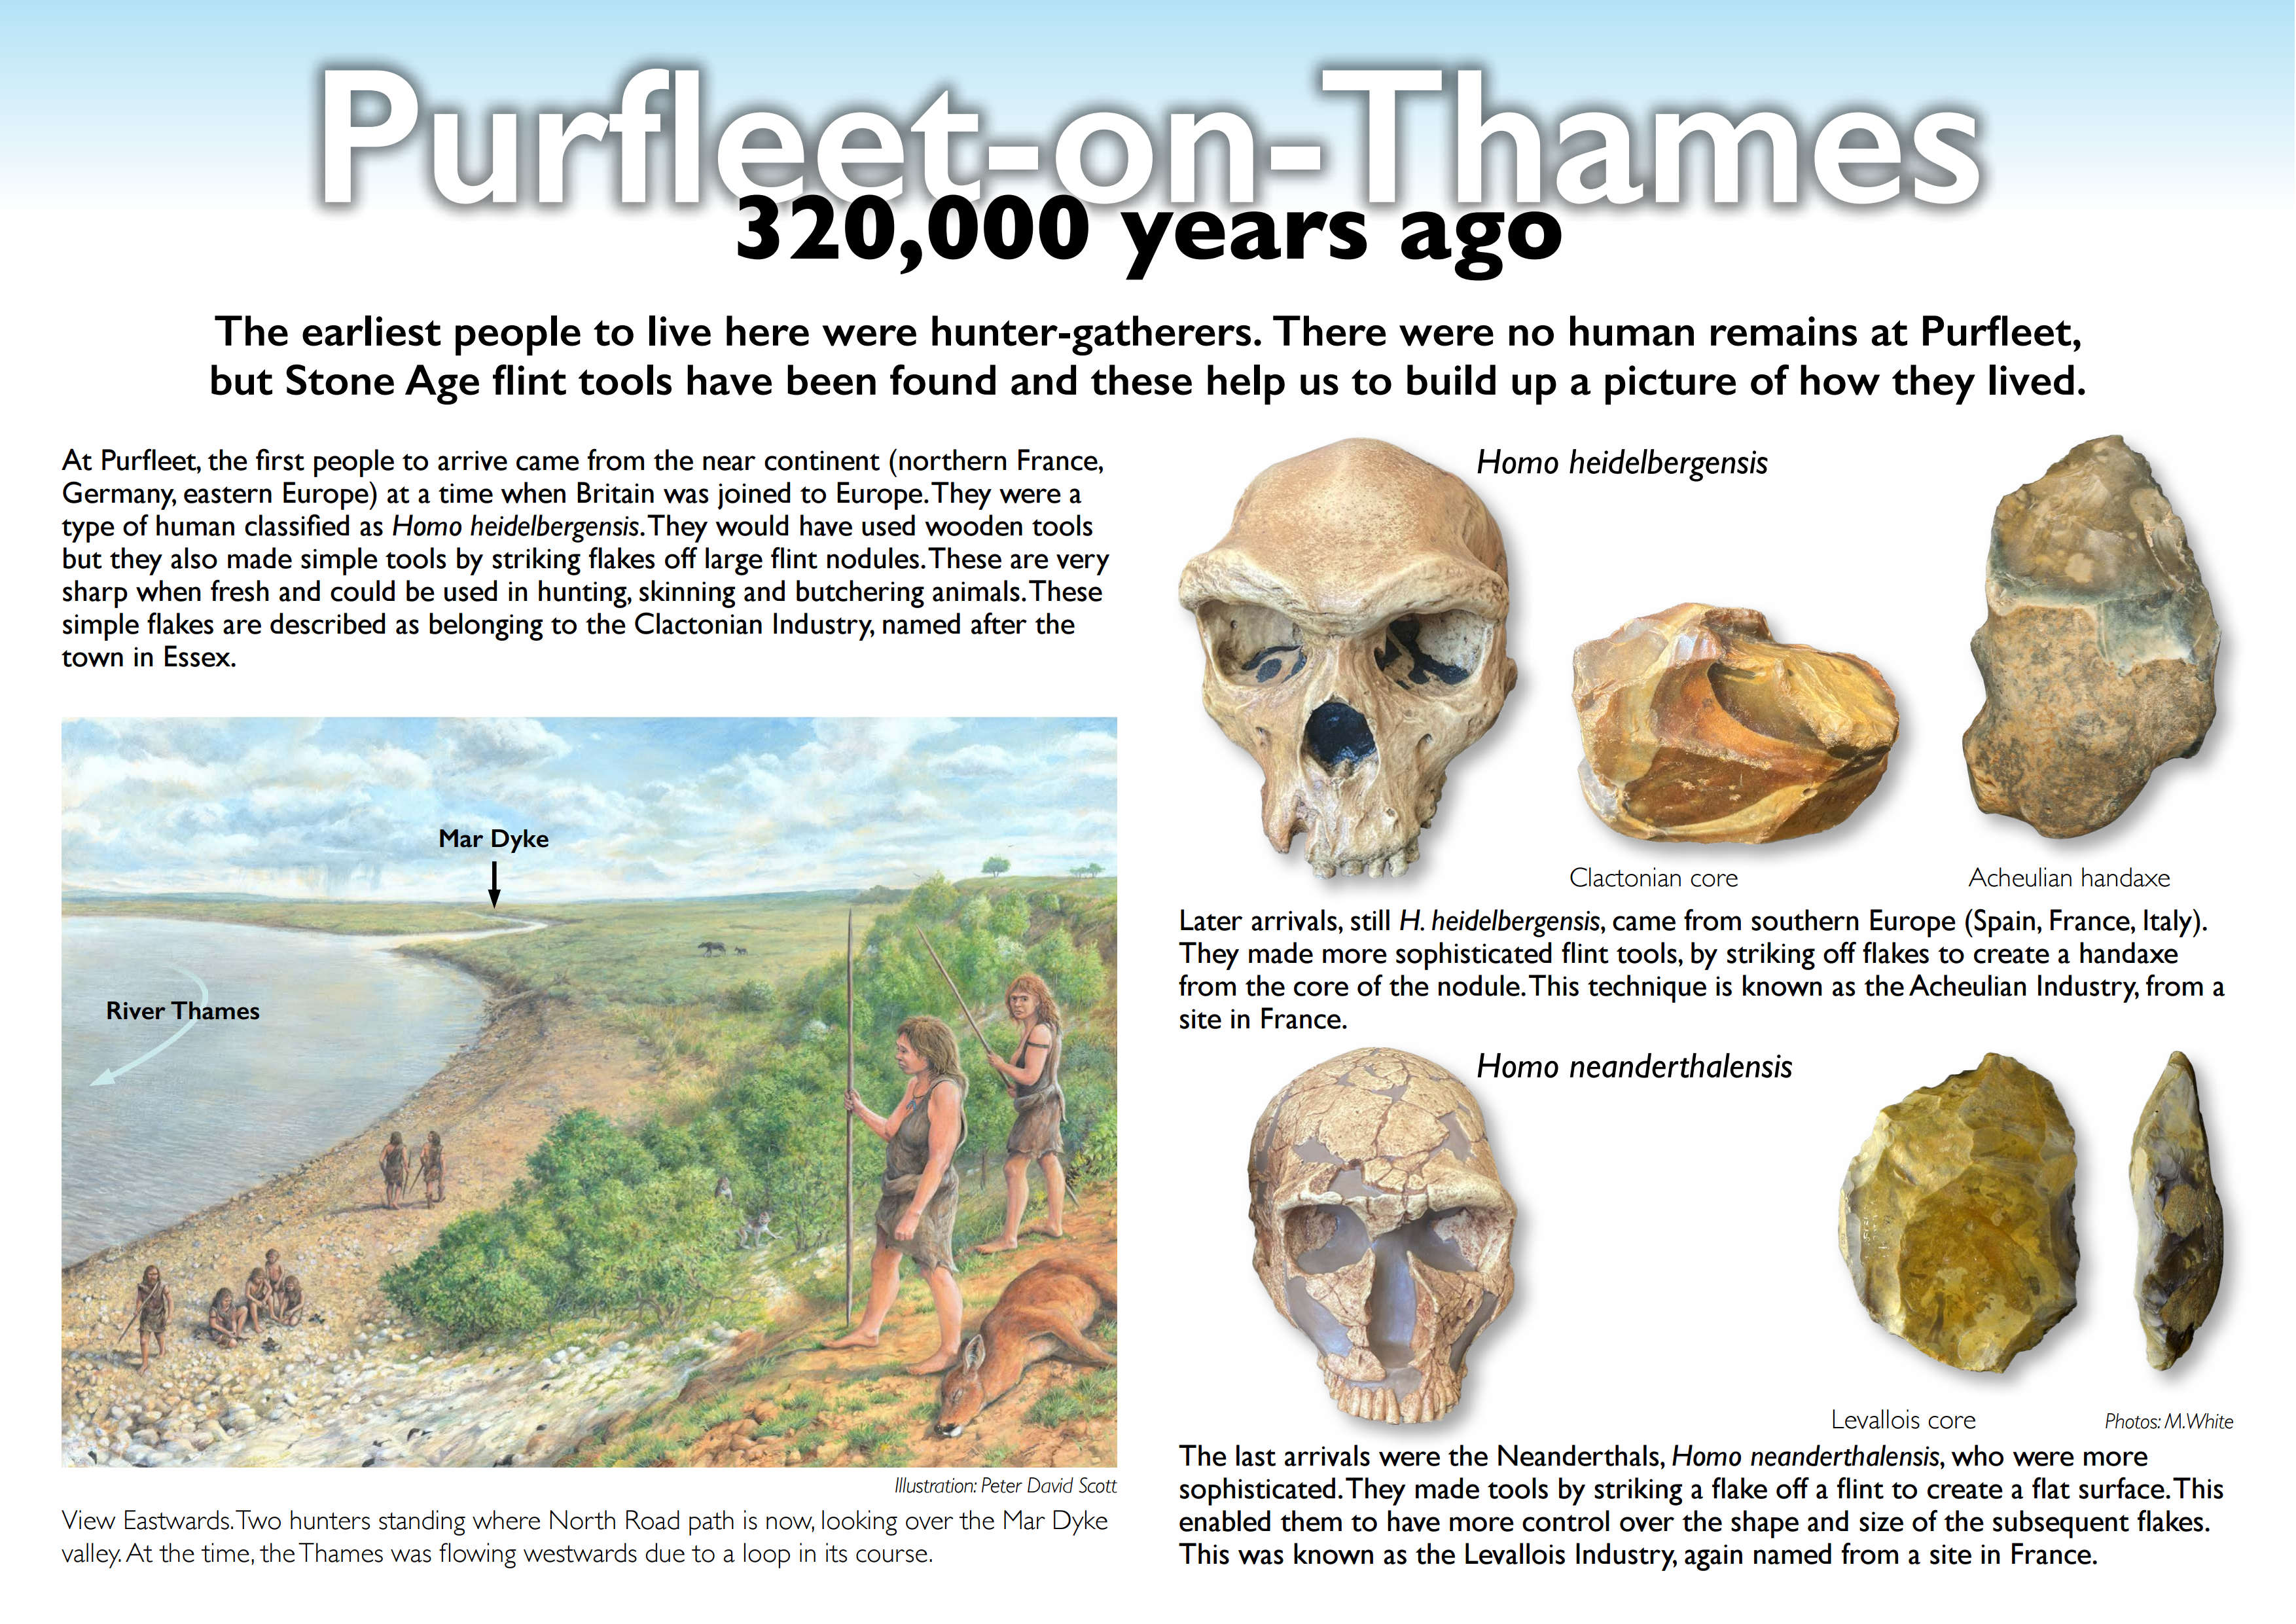 Purfleet-on-Thames 320,000 years ago. View Eastwards. Two hunters standing where North Road path is now, looking over the Mar Dyke valley. At the time, the Thames was flowing westwards due to a loop in its course. The earliest people to live here were hunter-gatherers. There were no human remains at Purfleet,but Stone Age flint tools have been found and these help us to build up a picture of how they lived. At Purfleet, the first people to arrive came from the near continent (northern France, Germany, eastern Europe) at a time when Britain was joined to Europe. They were a type of human classified as Homo heidelbergensis. They would have used wooden tools but they also made simple tools by striking flakes off large flint nodules. These are very sharp when fresh and could be used in hunting, skinning and butchering animals. These simple flakes are described as belonging to the Clactonian Industry, named after the town in Essex. Homo heidelbergensis. Homo neanderthalensis. Mar Dyke. River Thames. Clactonian core Acheulian handaxe. Levallois core. Later arrivals, still H. heidelbergensis, came from southern Europe (Spain, France, Italy). They made more sophisticated flint tools, by striking off flakes to create a handaxe from the core of the nodule. This technique is known as the Acheulian Industry, from a site in France. The last arrivals were the Neanderthals, Homo neanderthalensis, who were more sophisticated. They made tools by striking a flake off a flint to create a flat surface. This enabled them to have more control over the shape and size of the subsequent flakes. This was known as the Levallois Industry, again named from a site in France.